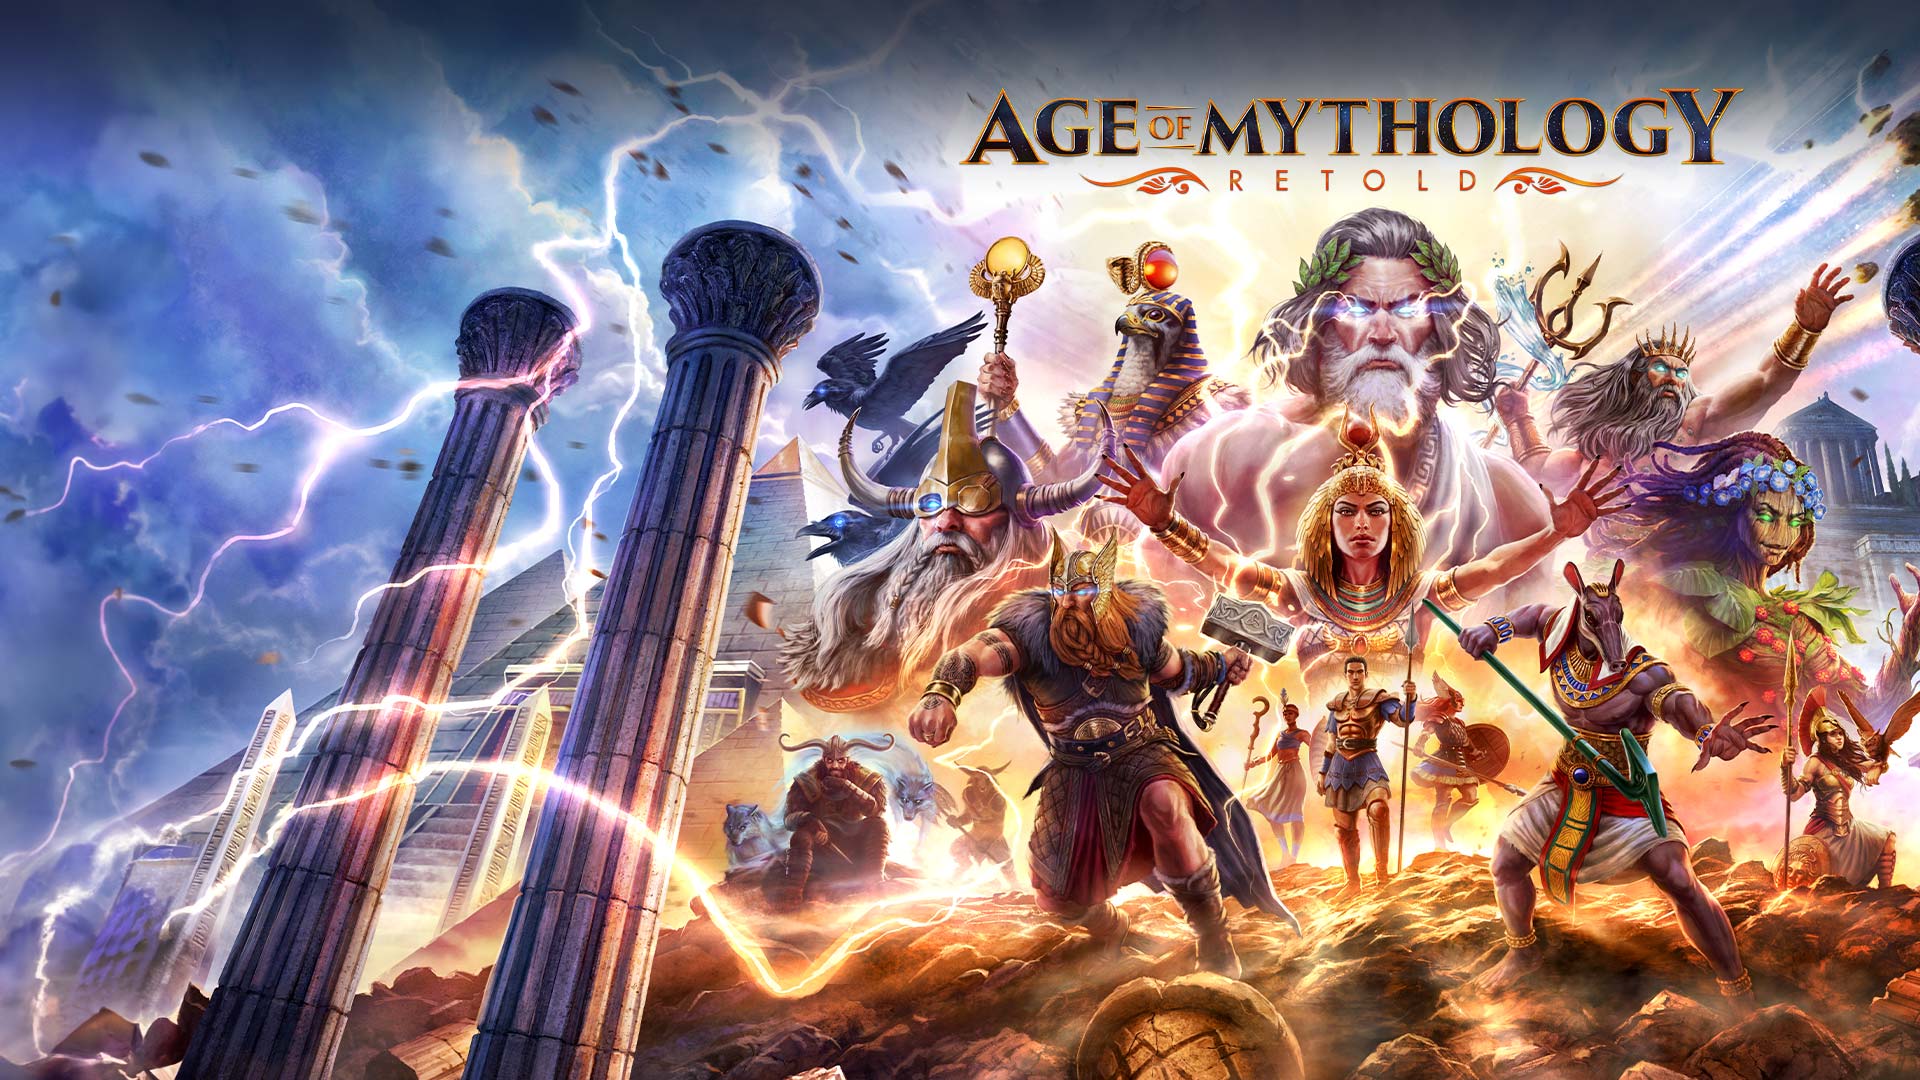 Age of Mythology Retold Logo, various gods and myths descend from the sky.